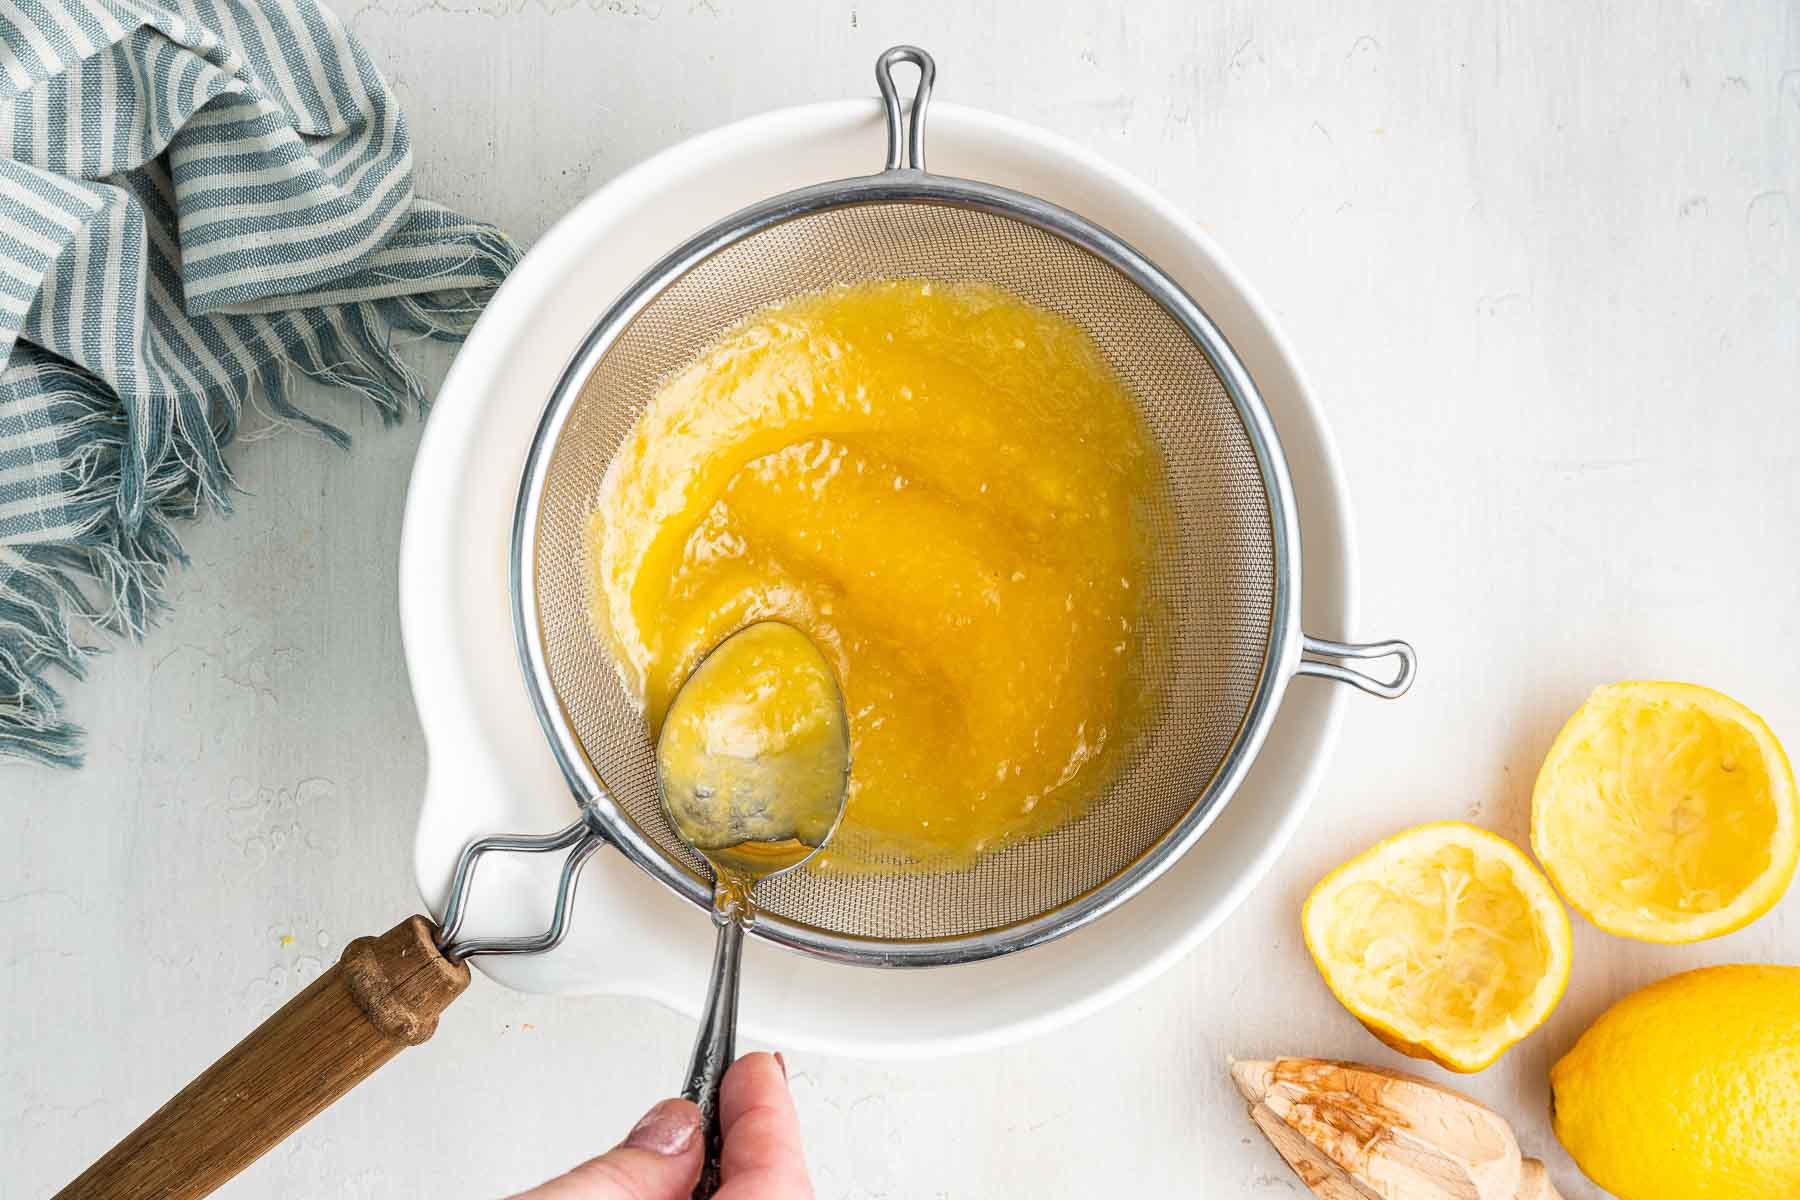 Spoon pushing yellow batter through strainer over white bowl.